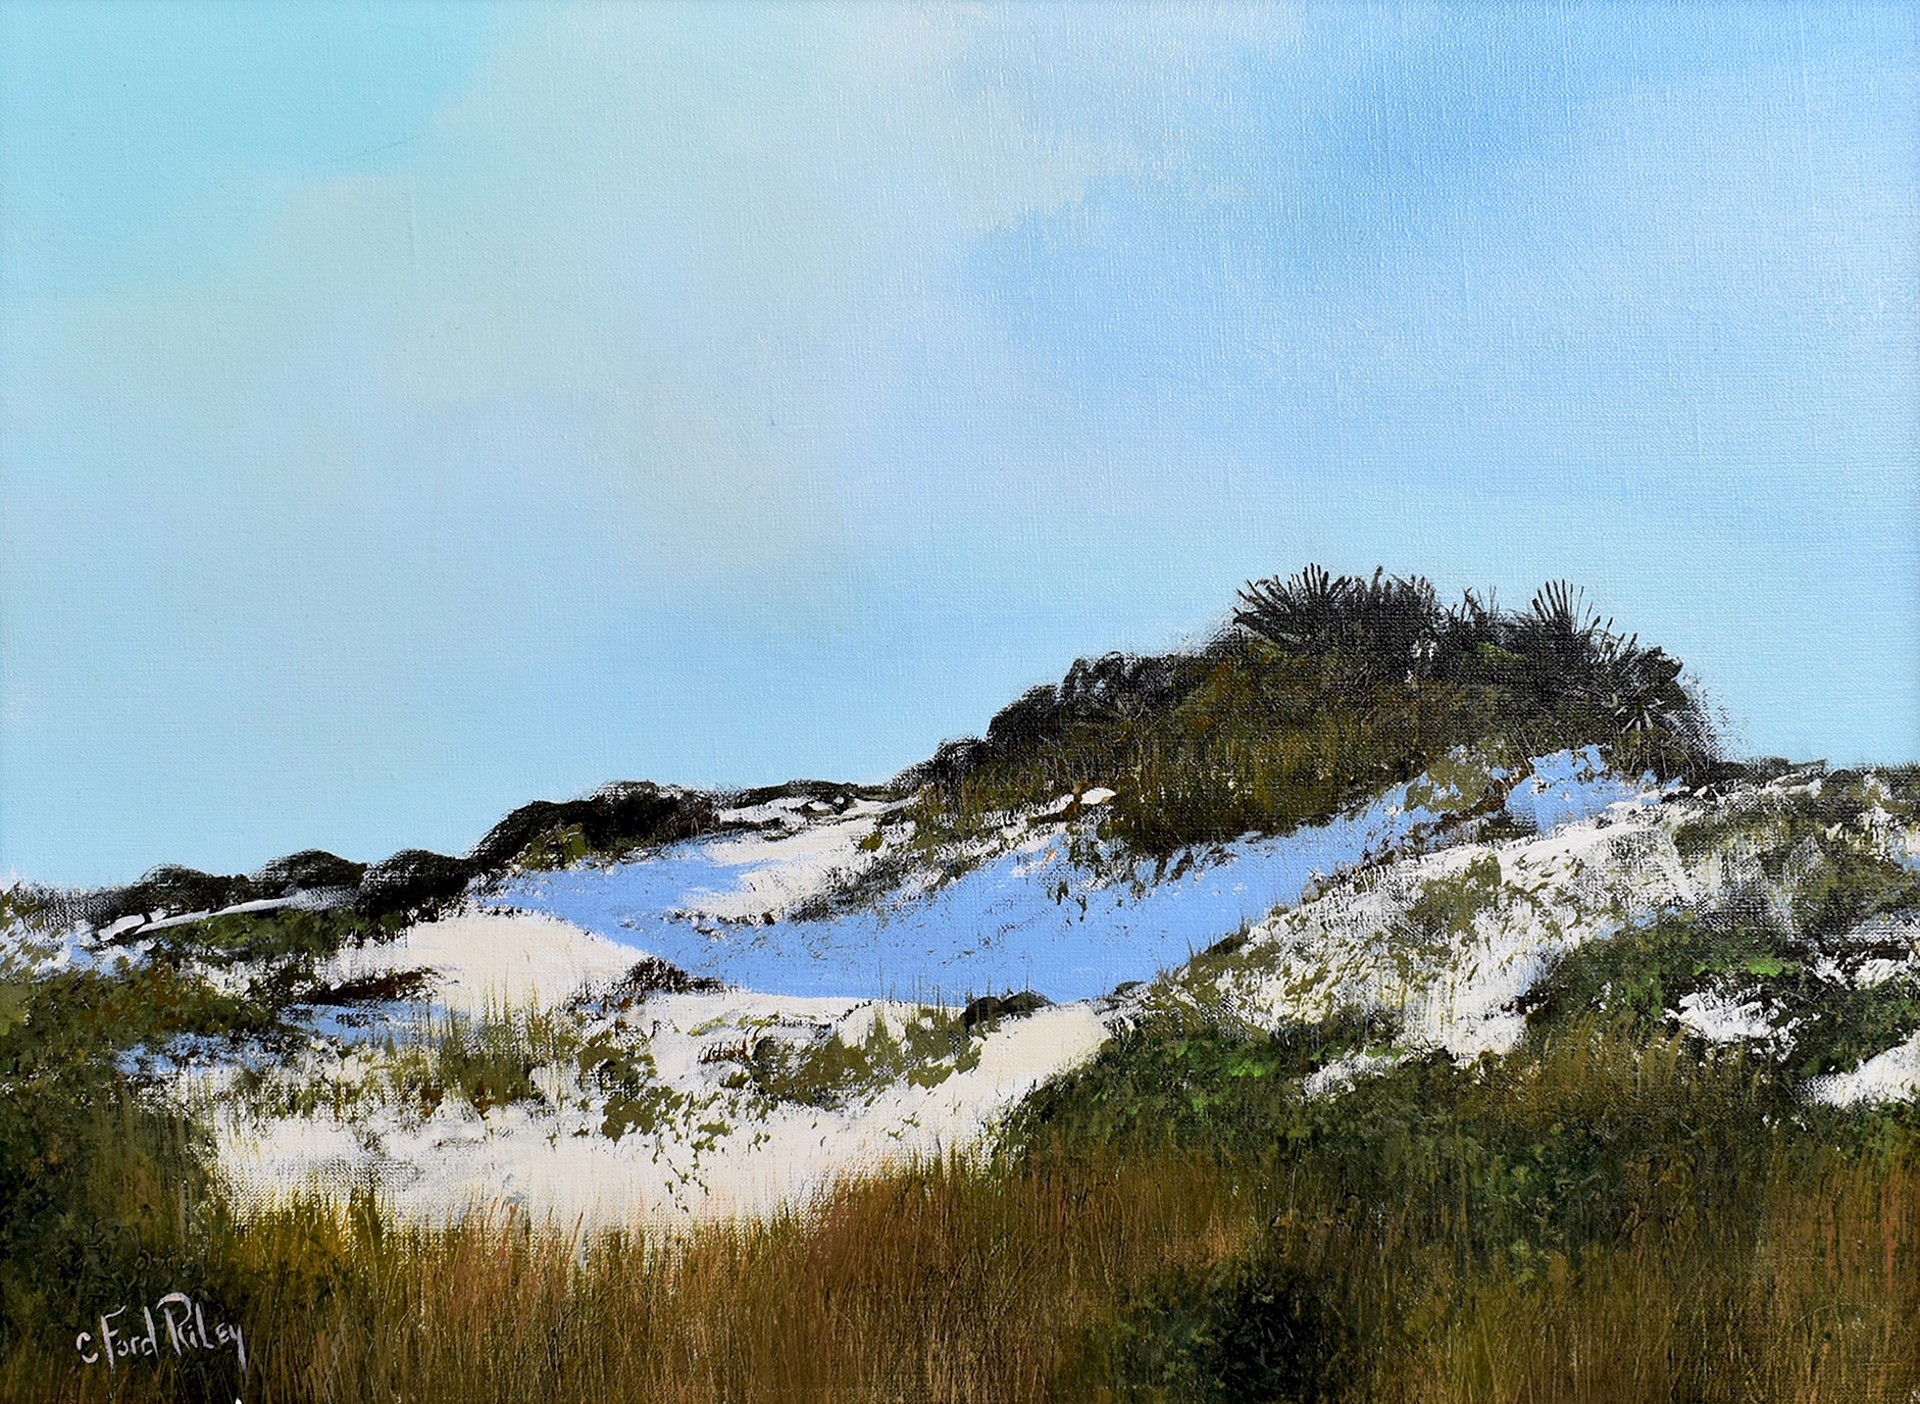 Sand Dunes by C. Ford Riley